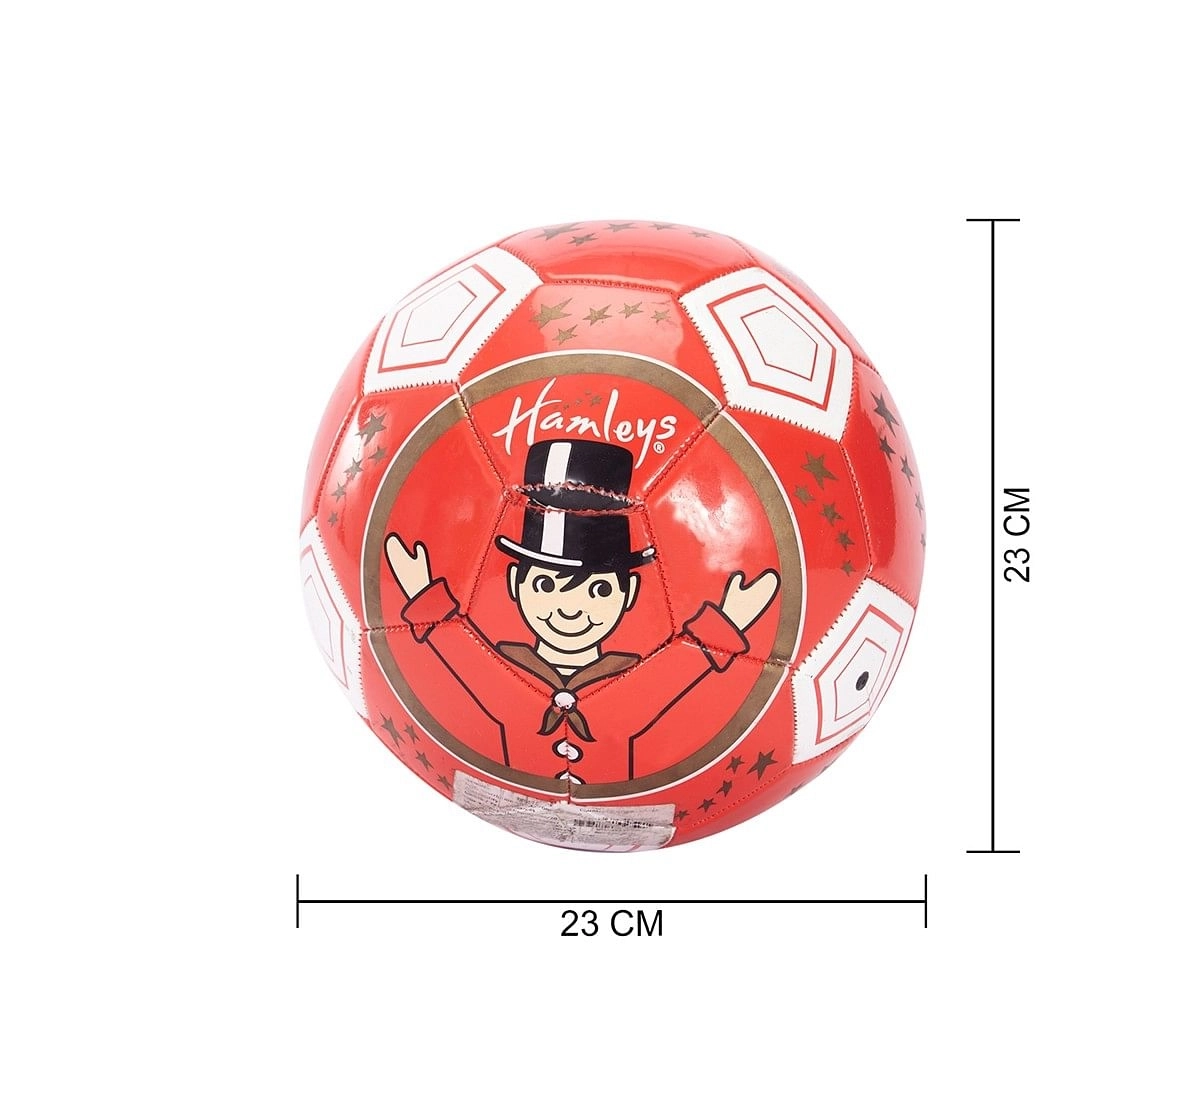 Hamleys Football Large Ball Sports & Accessories for Kids age 3Y+ (Red)